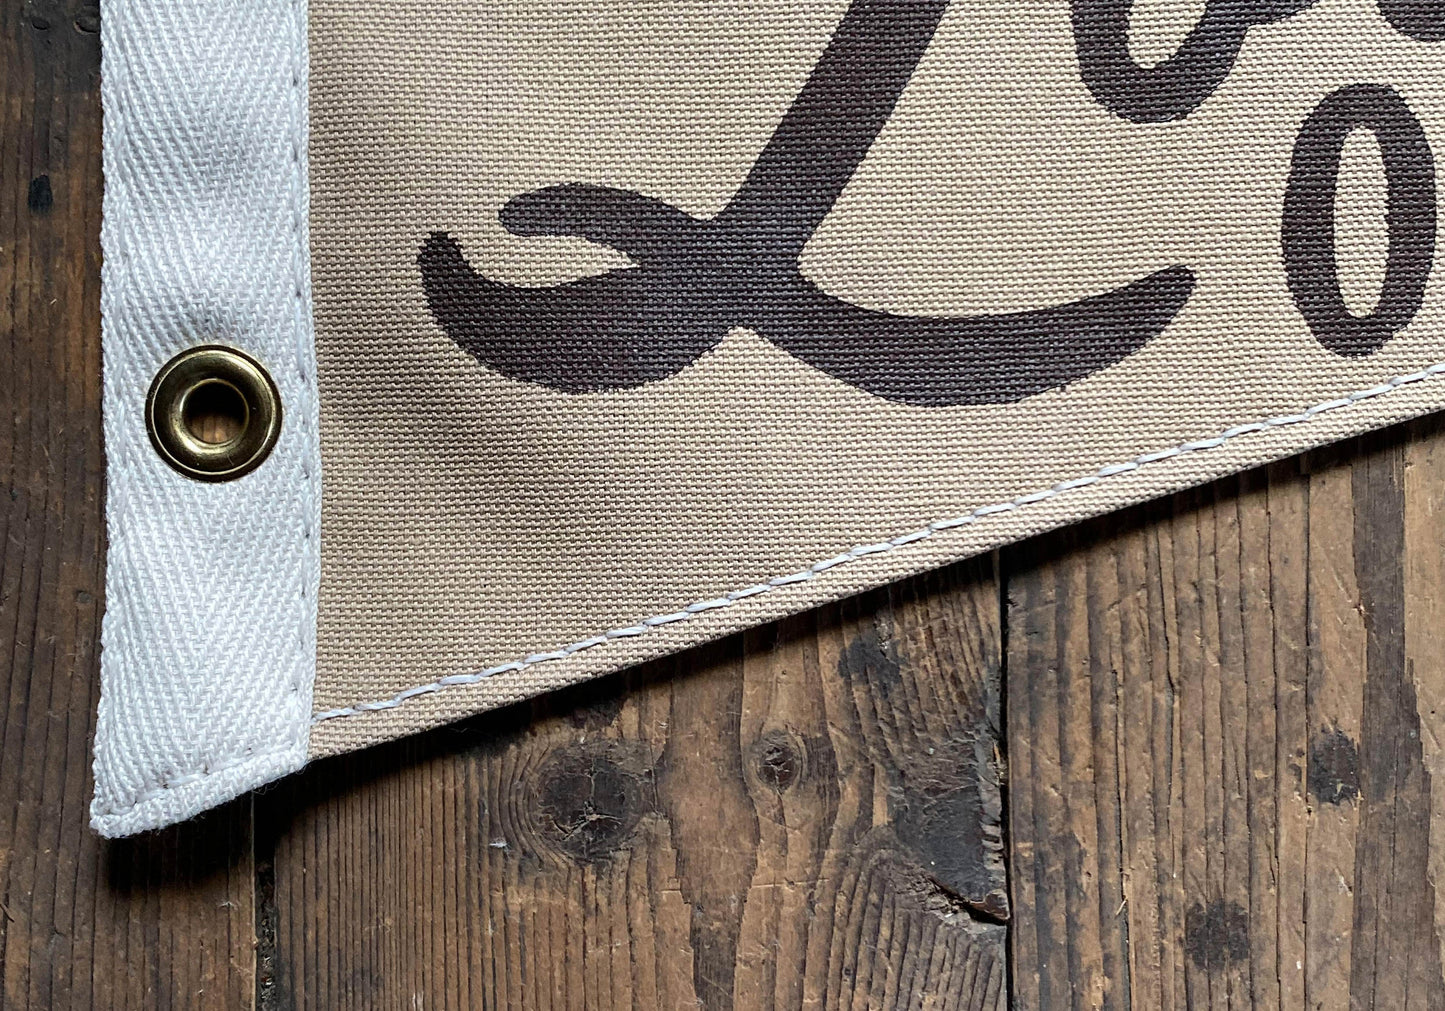 Locals Only Surf-Inspired Pennant